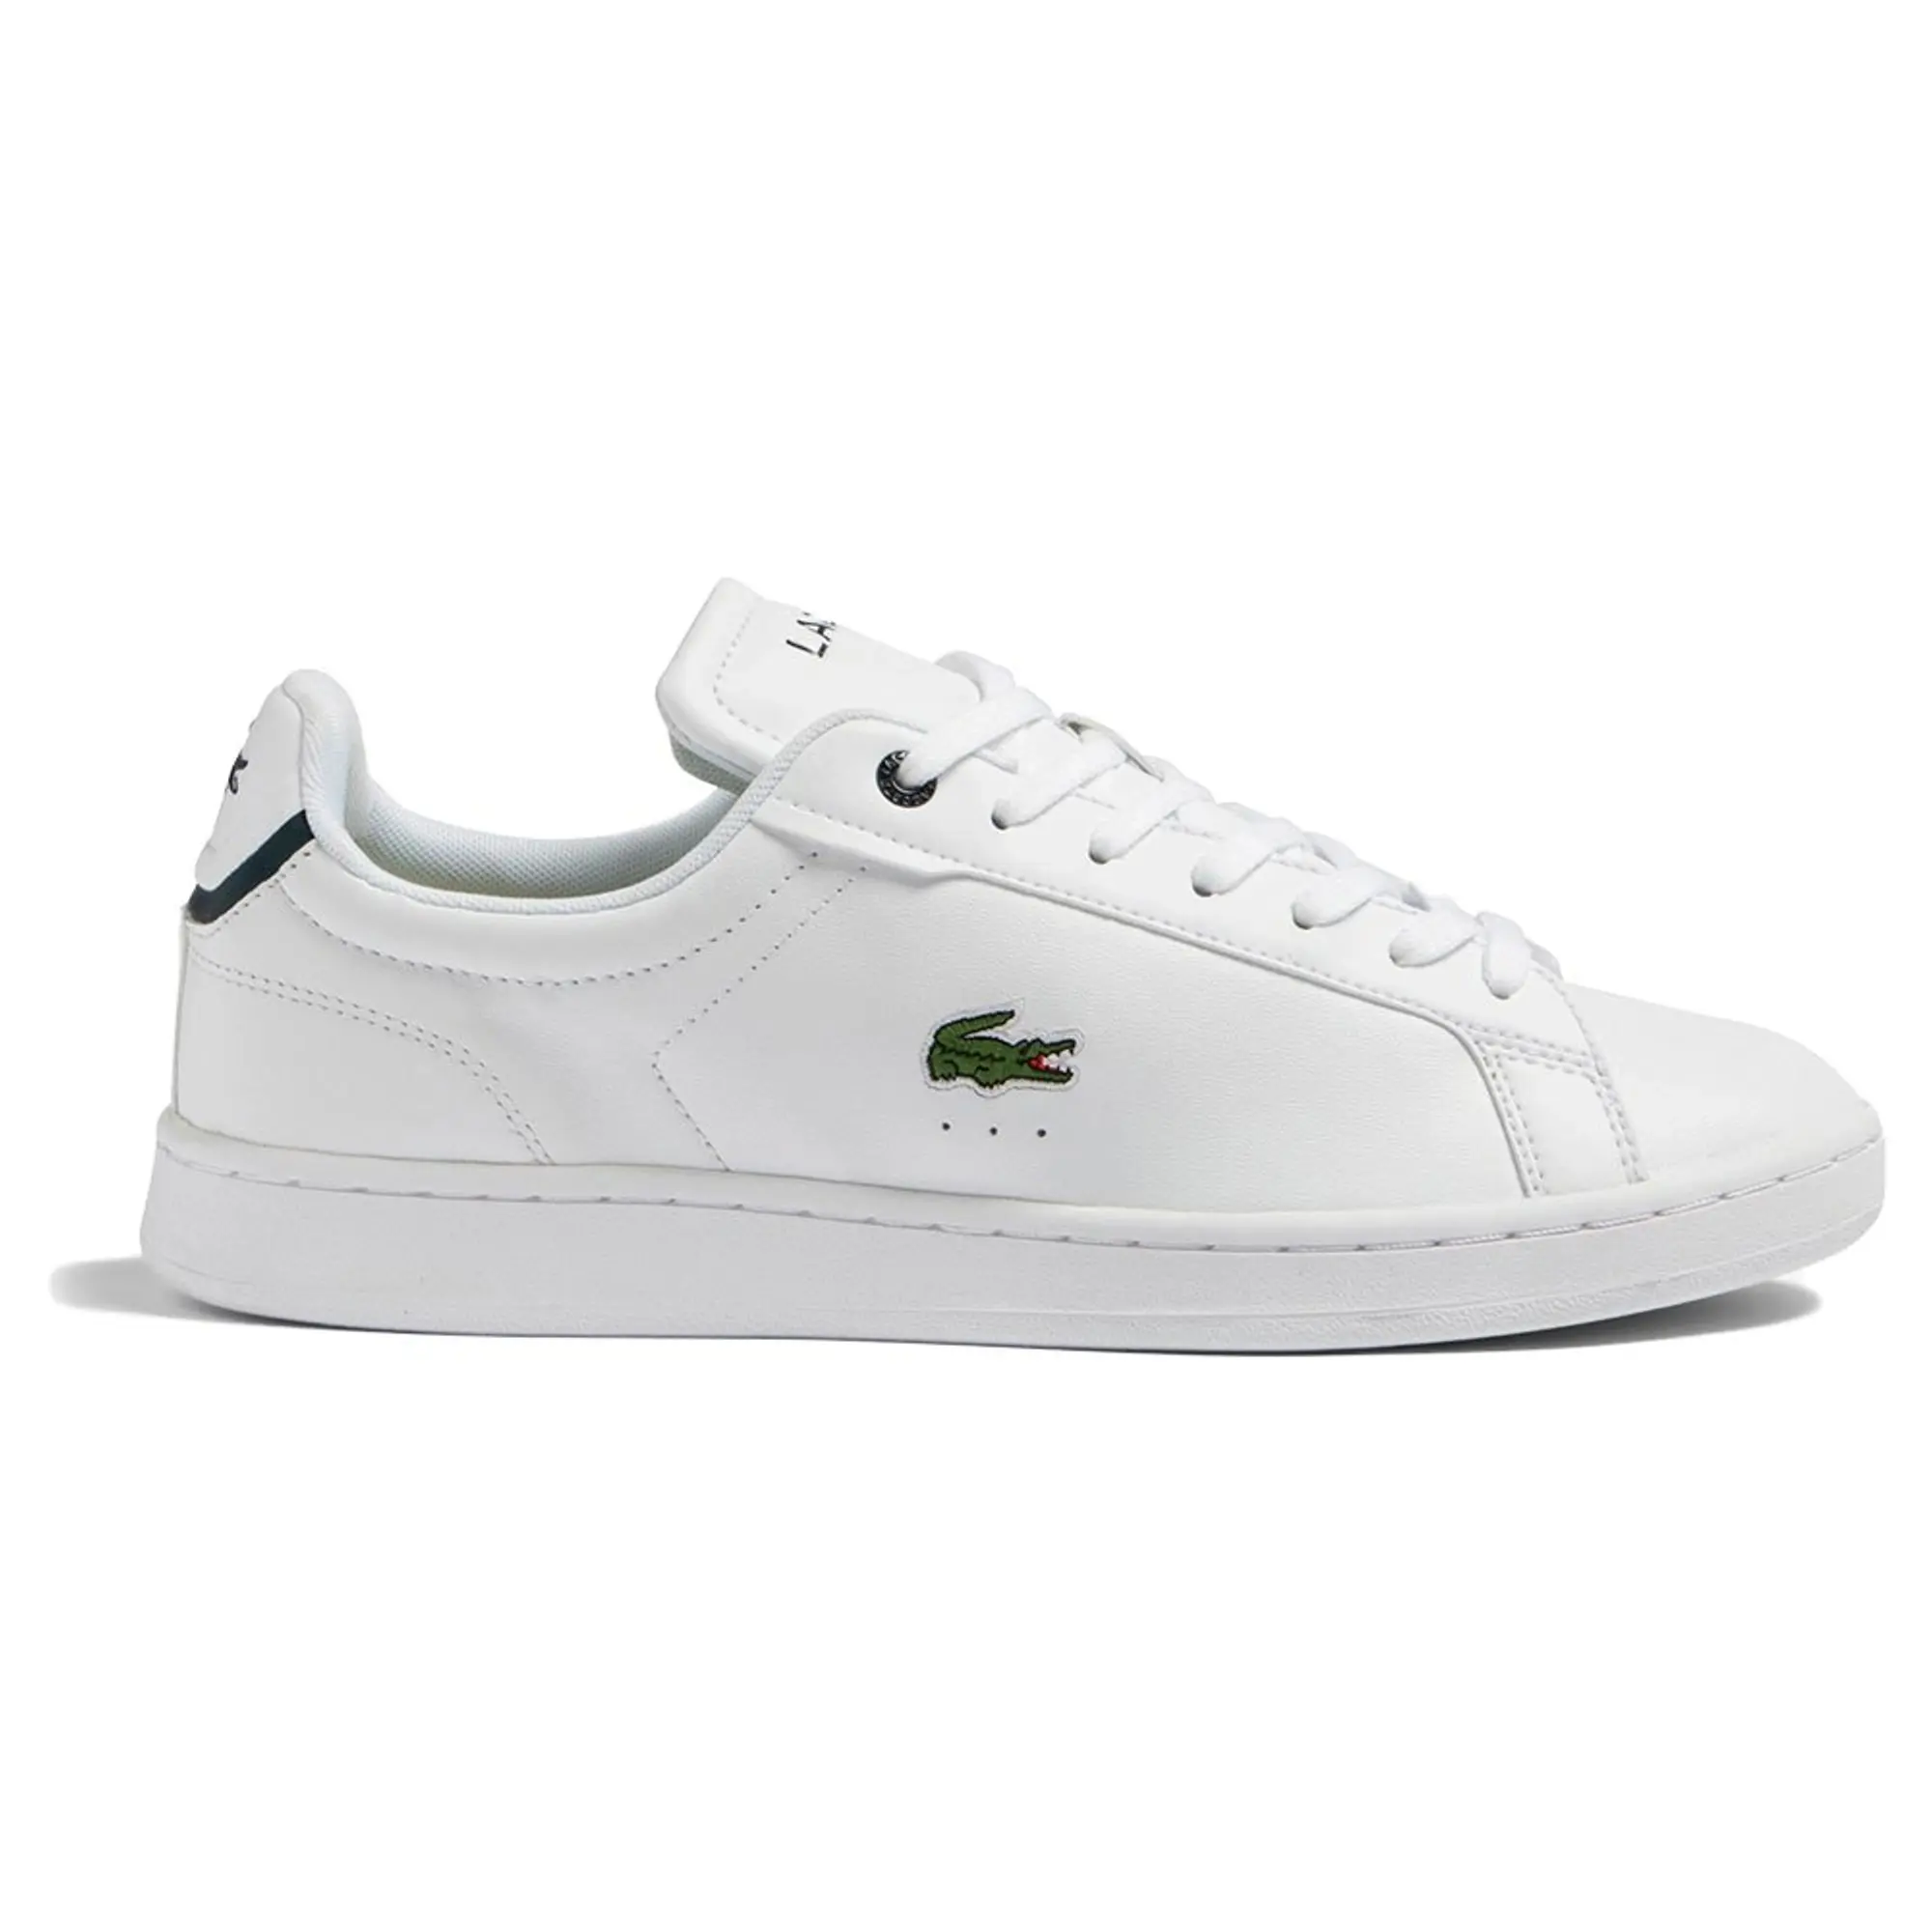 Lacoste Carnaby Pro Bl23 Trainer - White, White